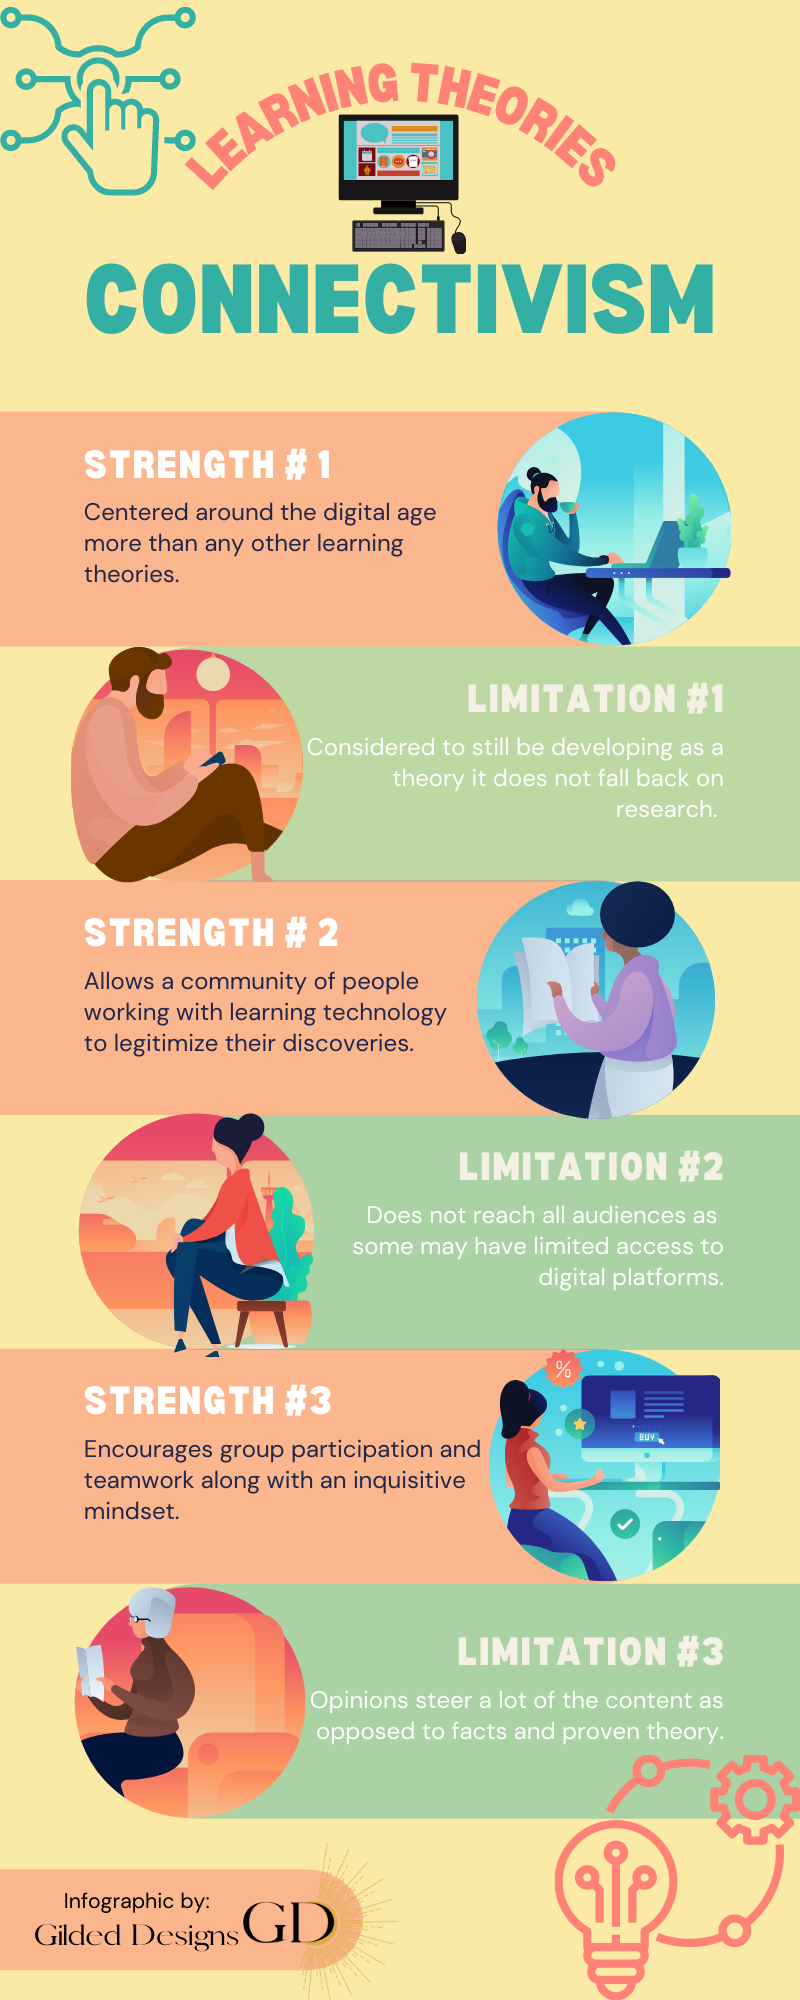 THIS IS AN INFOGRAPHIC ON CONNECTIVISM